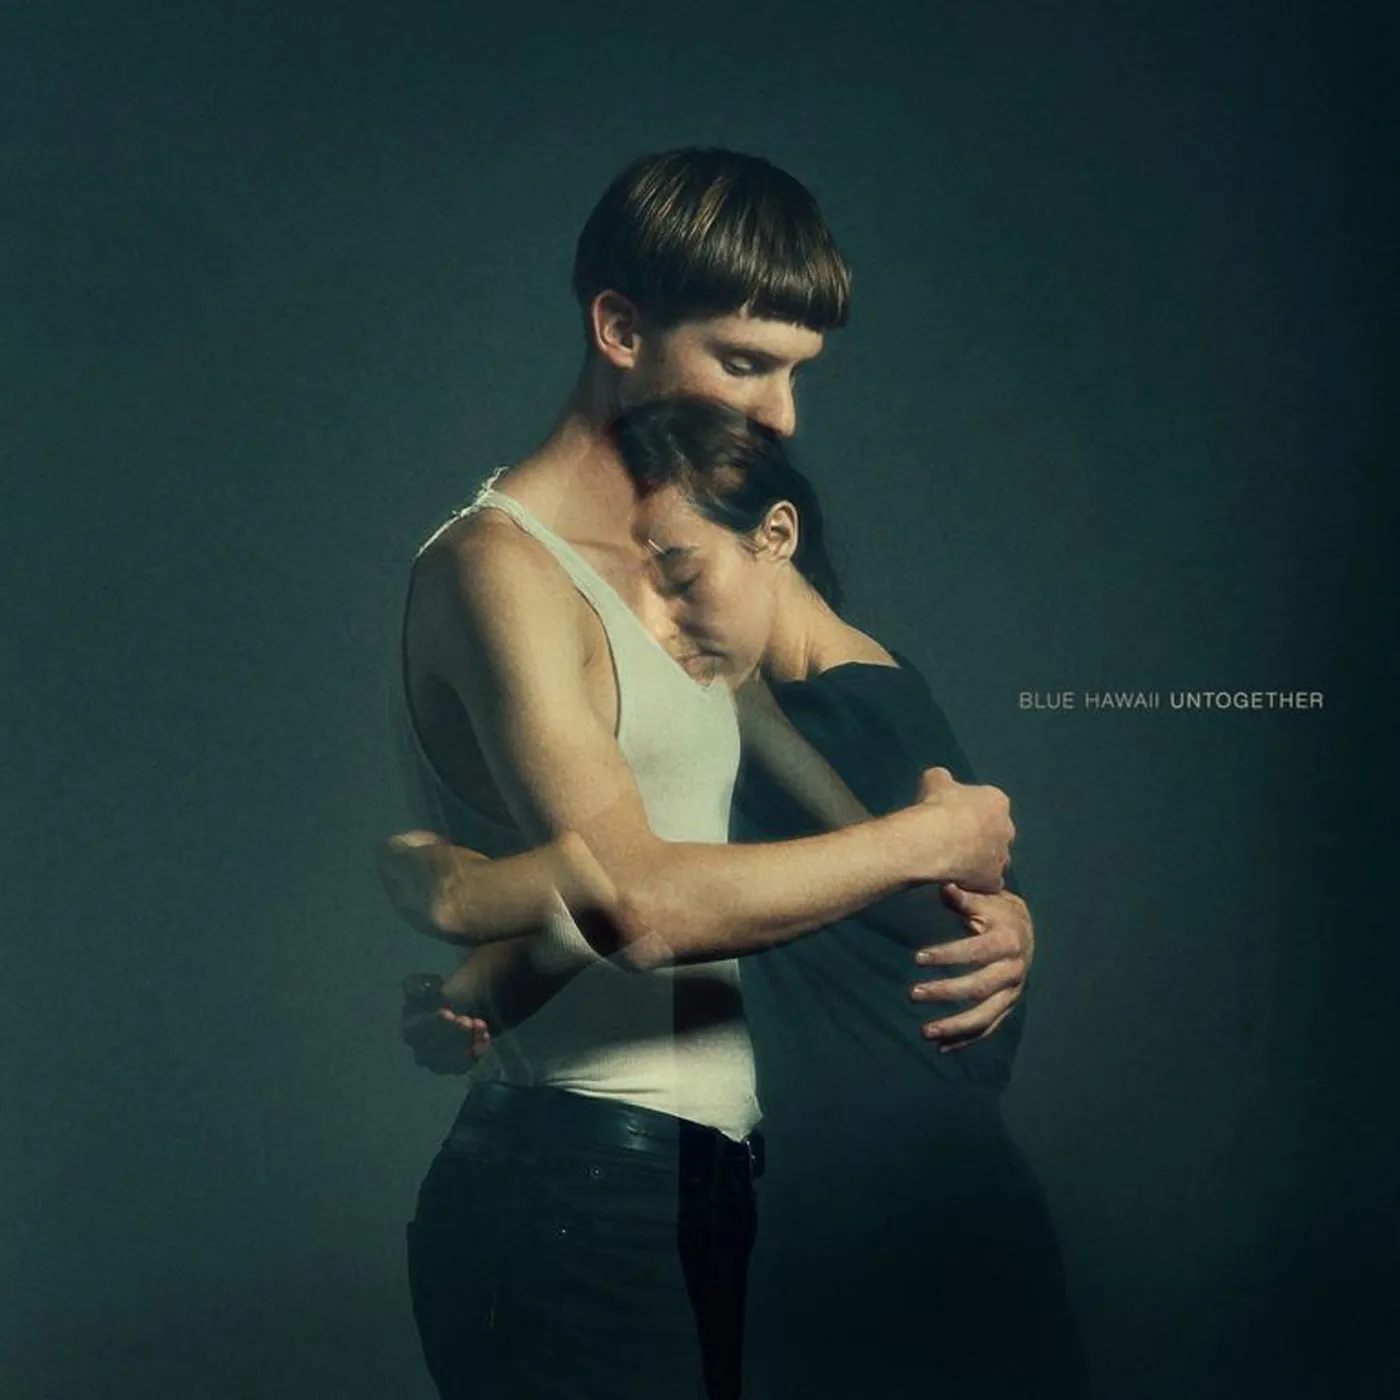 <strong>Blue Hawaii - Untogether (10th Anniversary Edition)</strong> (Vinyl LP - blue)